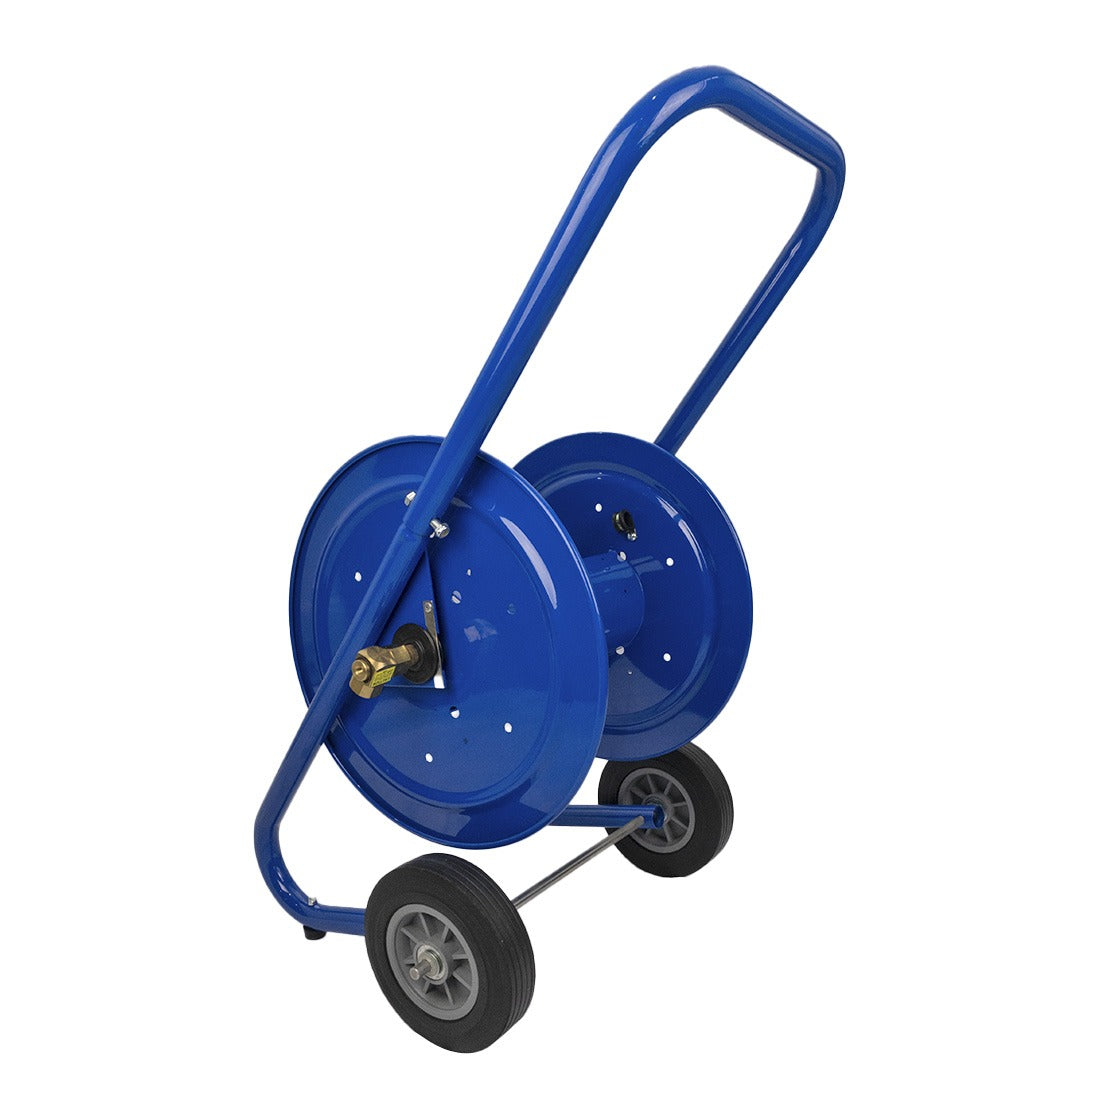 Coxreels Hose Reel Dolly